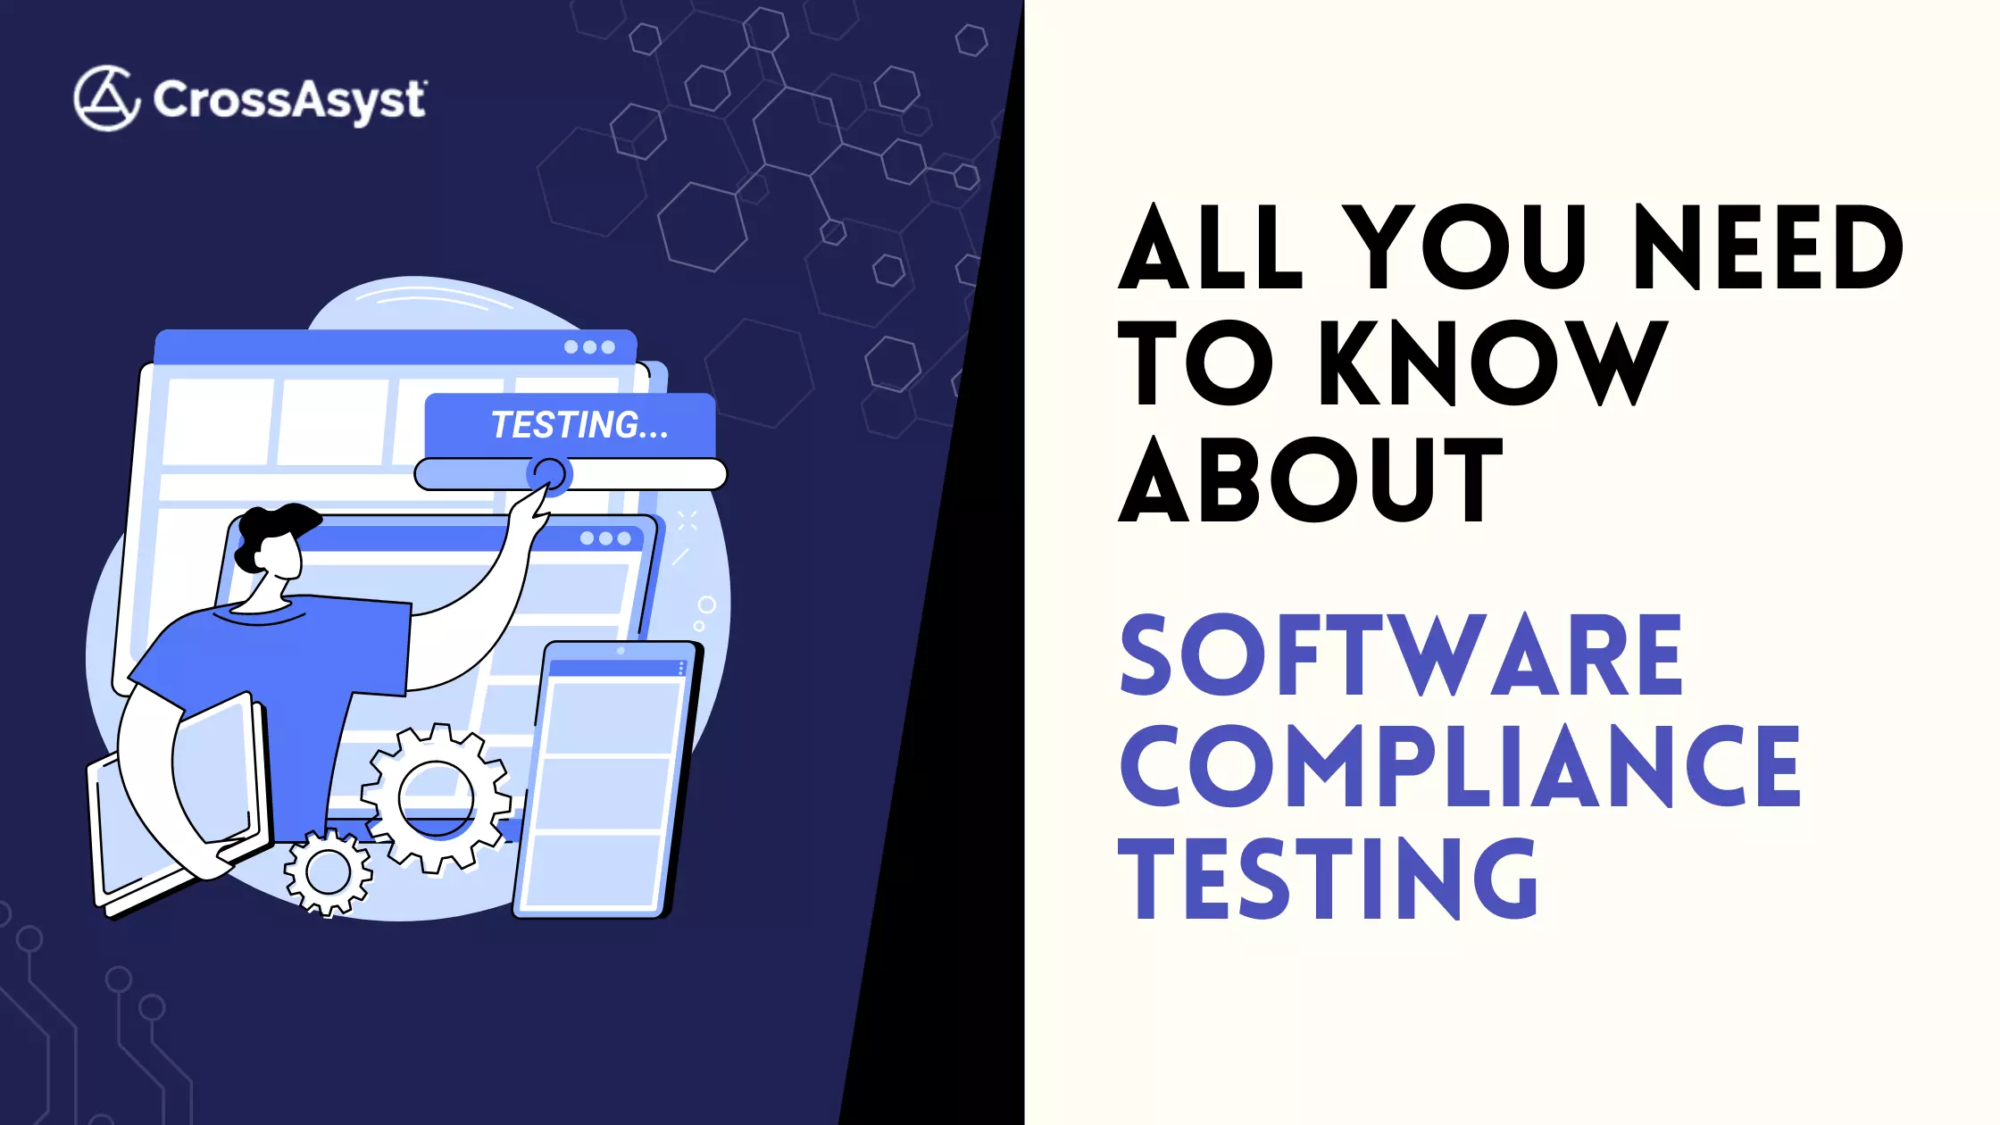 All You Need to Know about Software Compliance Testing